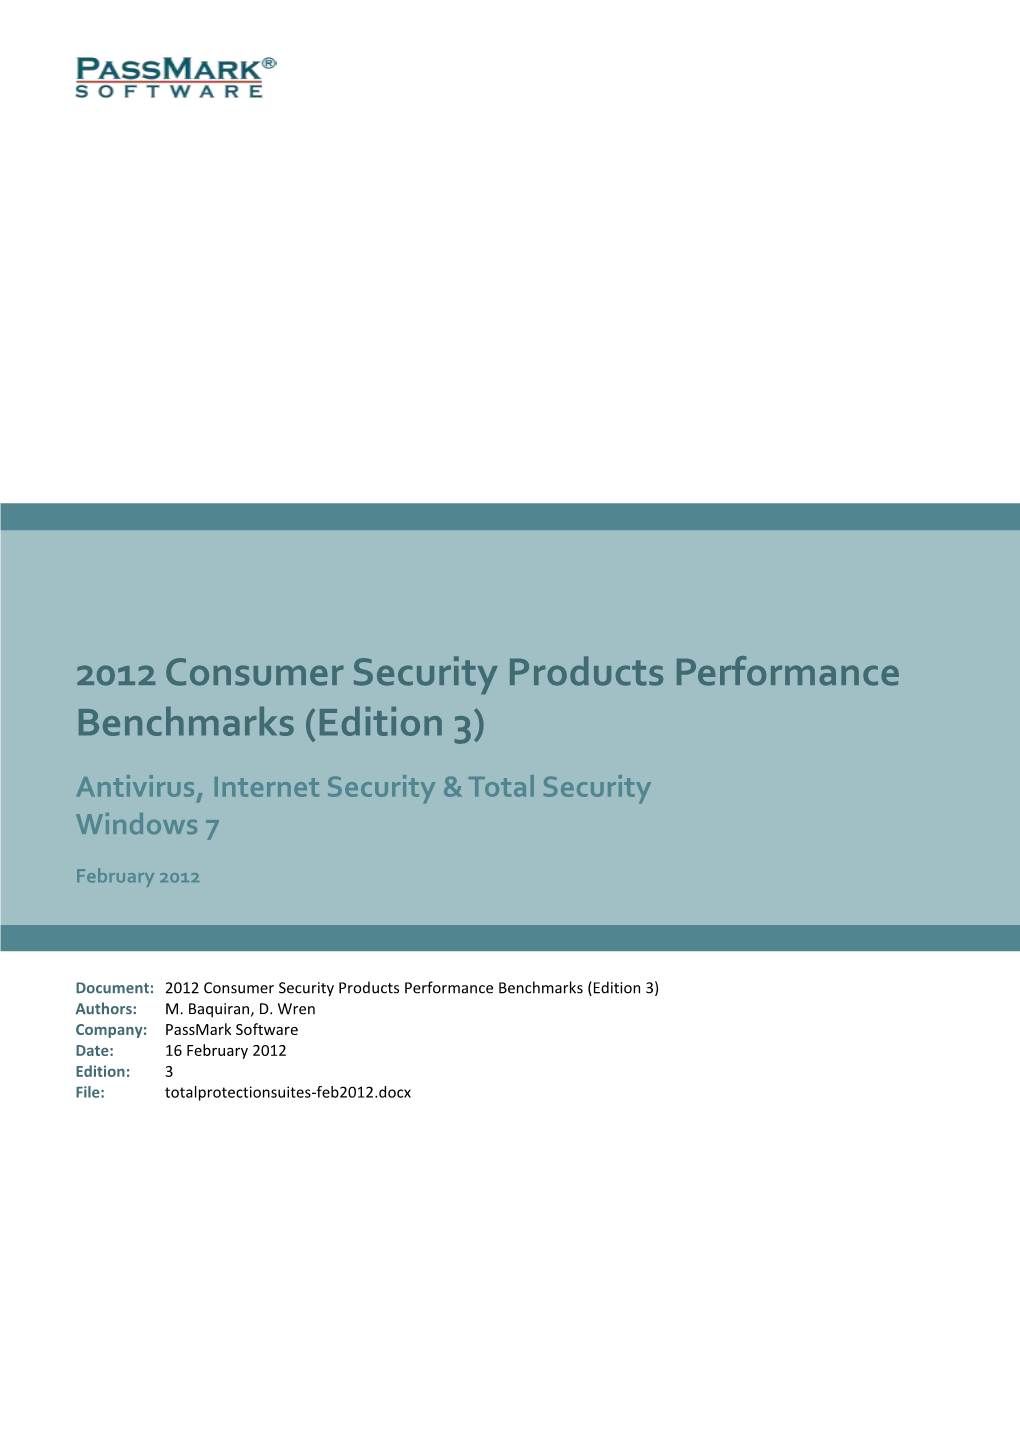 2012 Consumer Security Products Performance Benchmarks (Edition 3) Antivirus, Internet Security & Total Security Windows 7